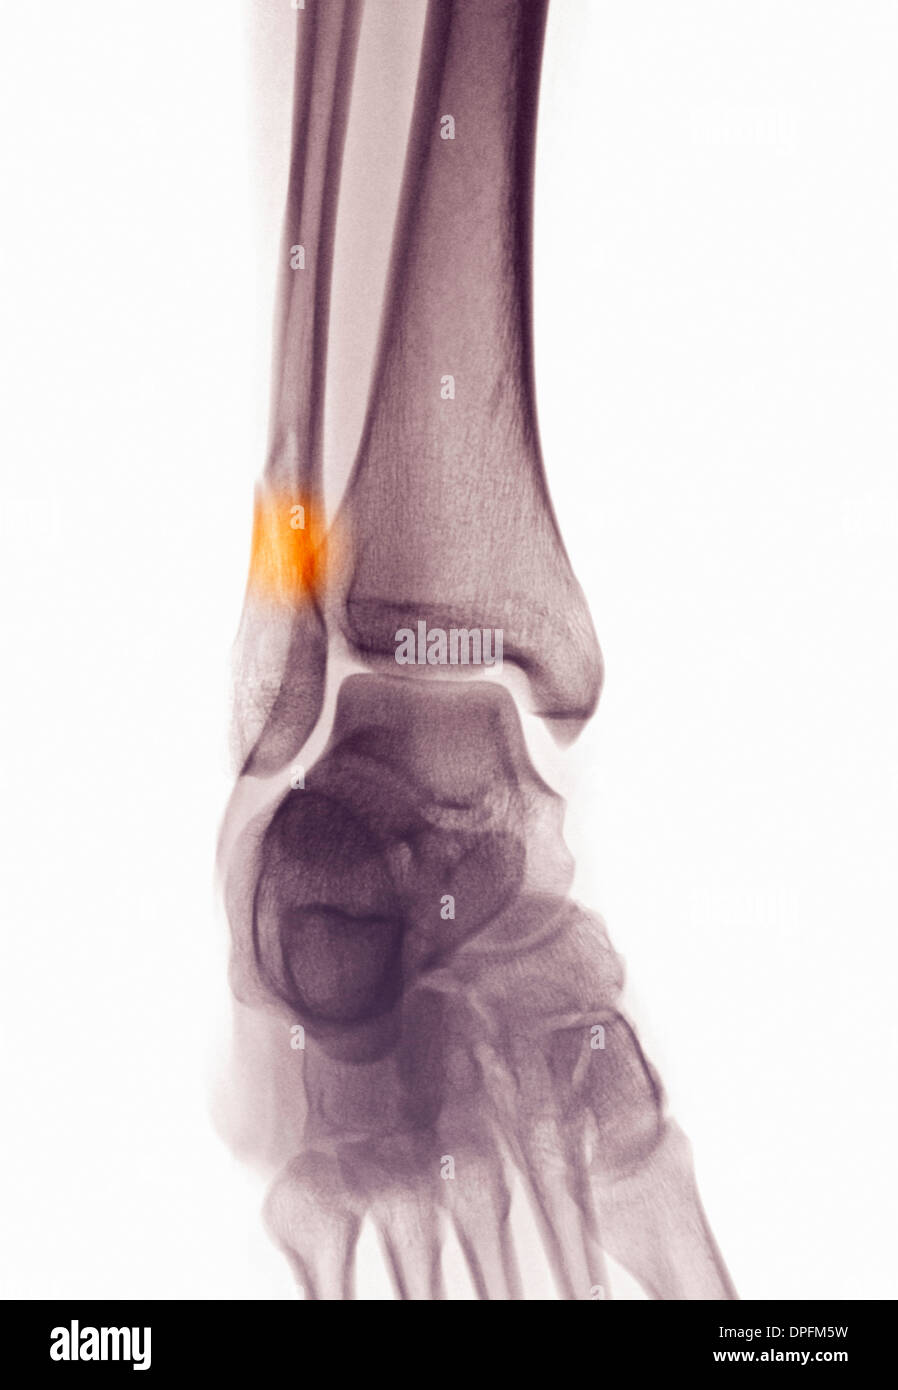 ankle x-ray showing fractured distal fibula Stock Photo